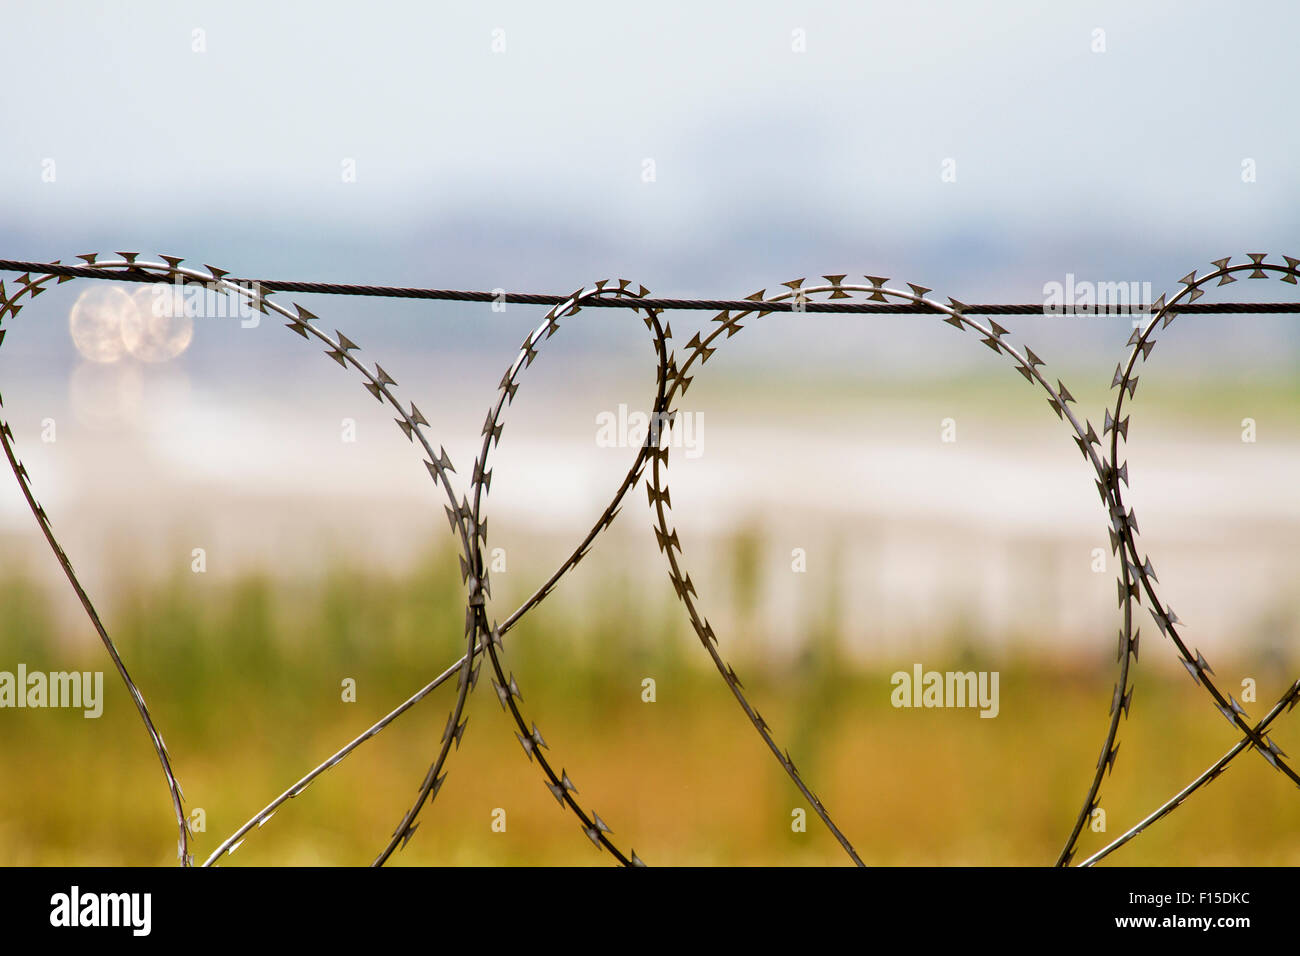 Prison fence, security wall Stock Photo